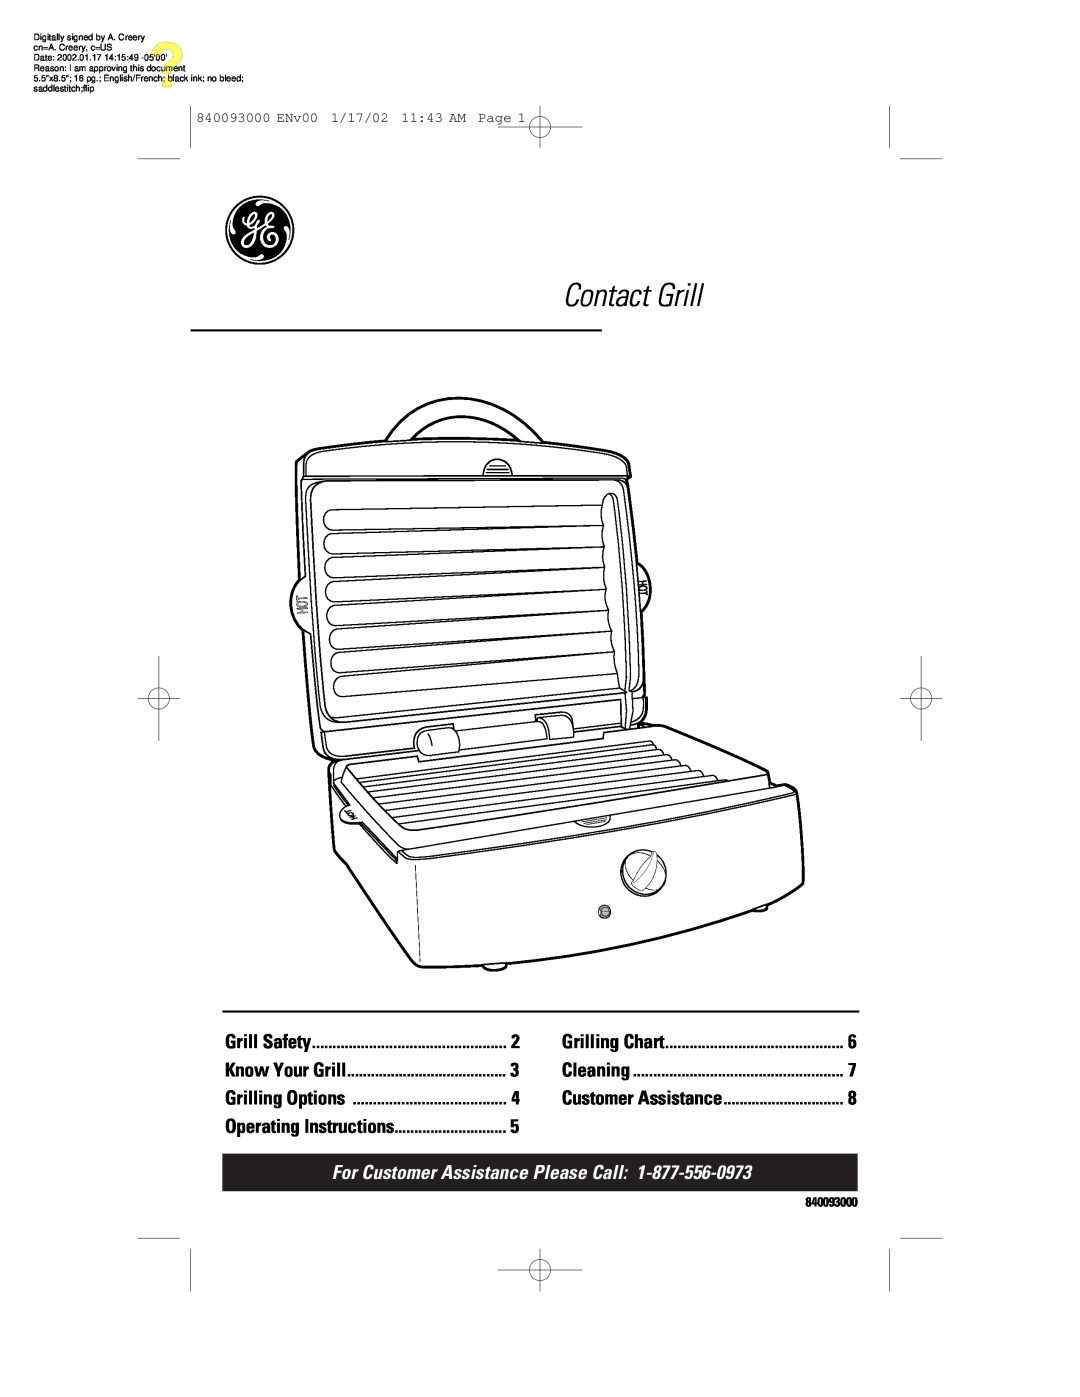 GE 106668 manual Contact Grill, For Customer Assistance Please Call, Grill Safety, Grilling Chart, Know Your Grill 